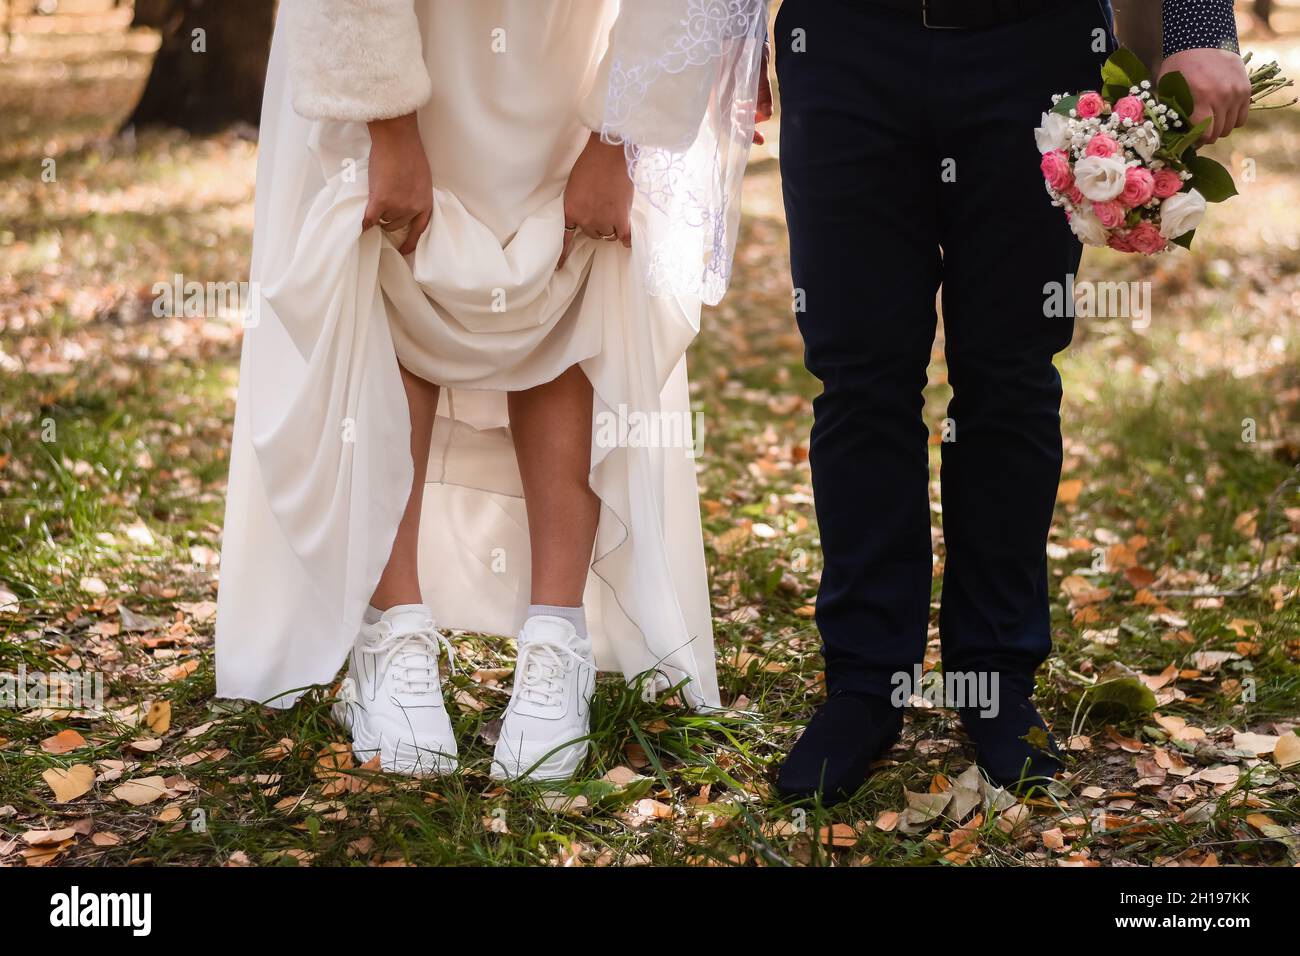 the bride lifted her skirt, showing white sneakers. Stock Photo